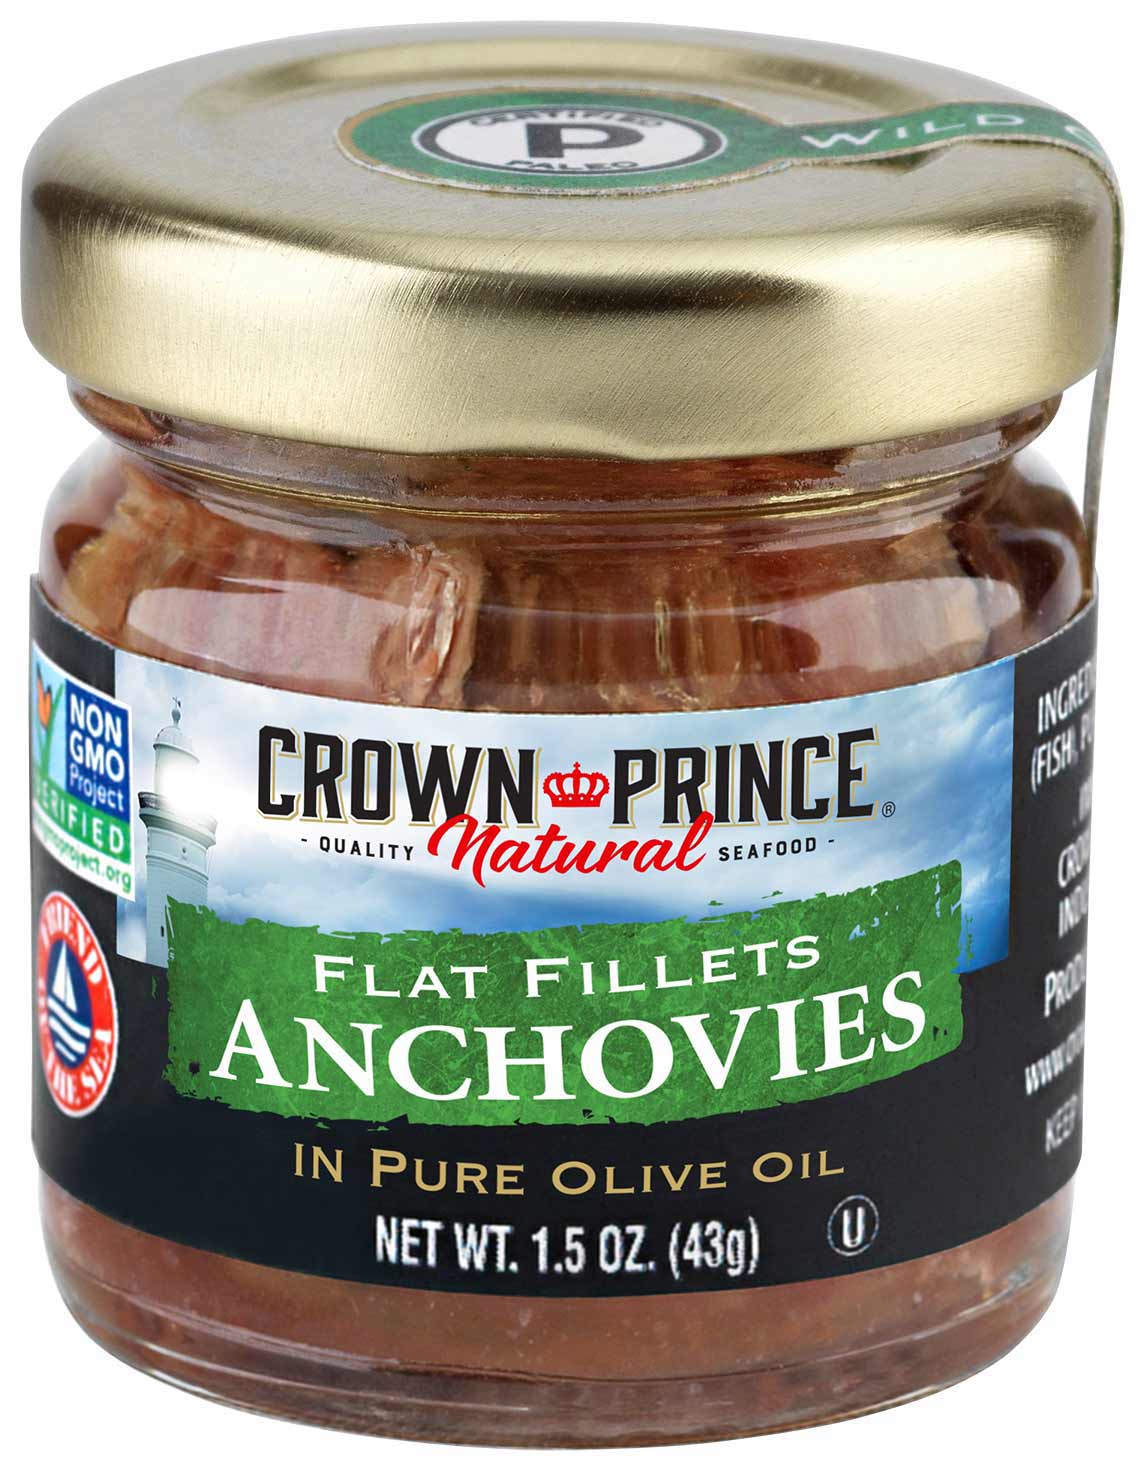 Crown Prince Natural Flat Fillets of Anchovies in Pure Olive Oil